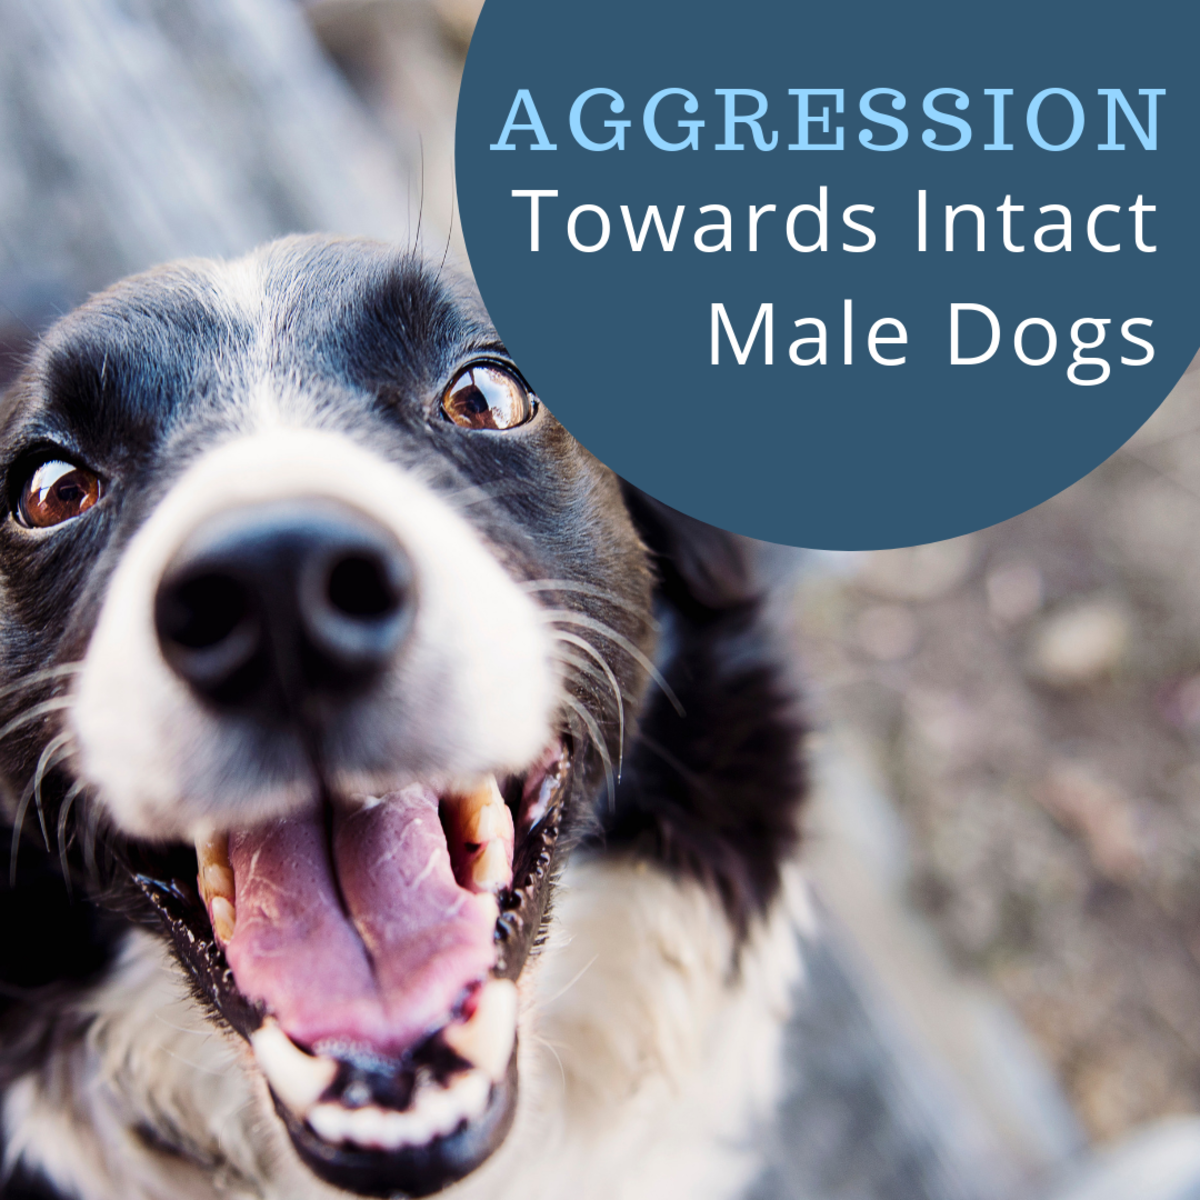 Aggression towards intact male dogs.